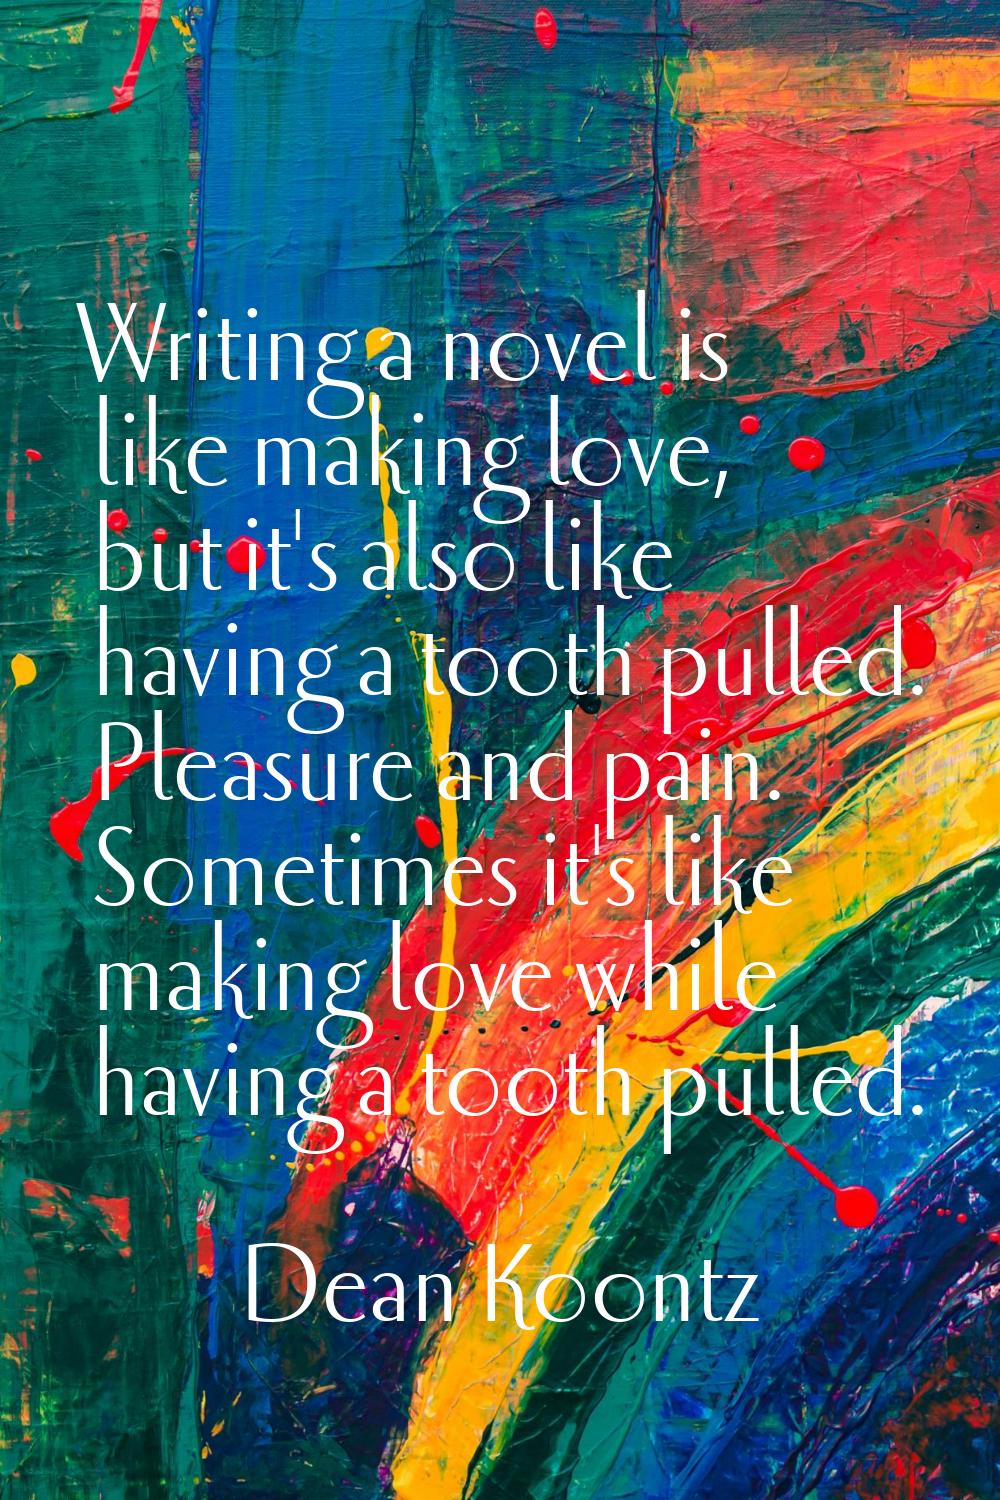 Writing a novel is like making love, but it's also like having a tooth pulled. Pleasure and pain. S